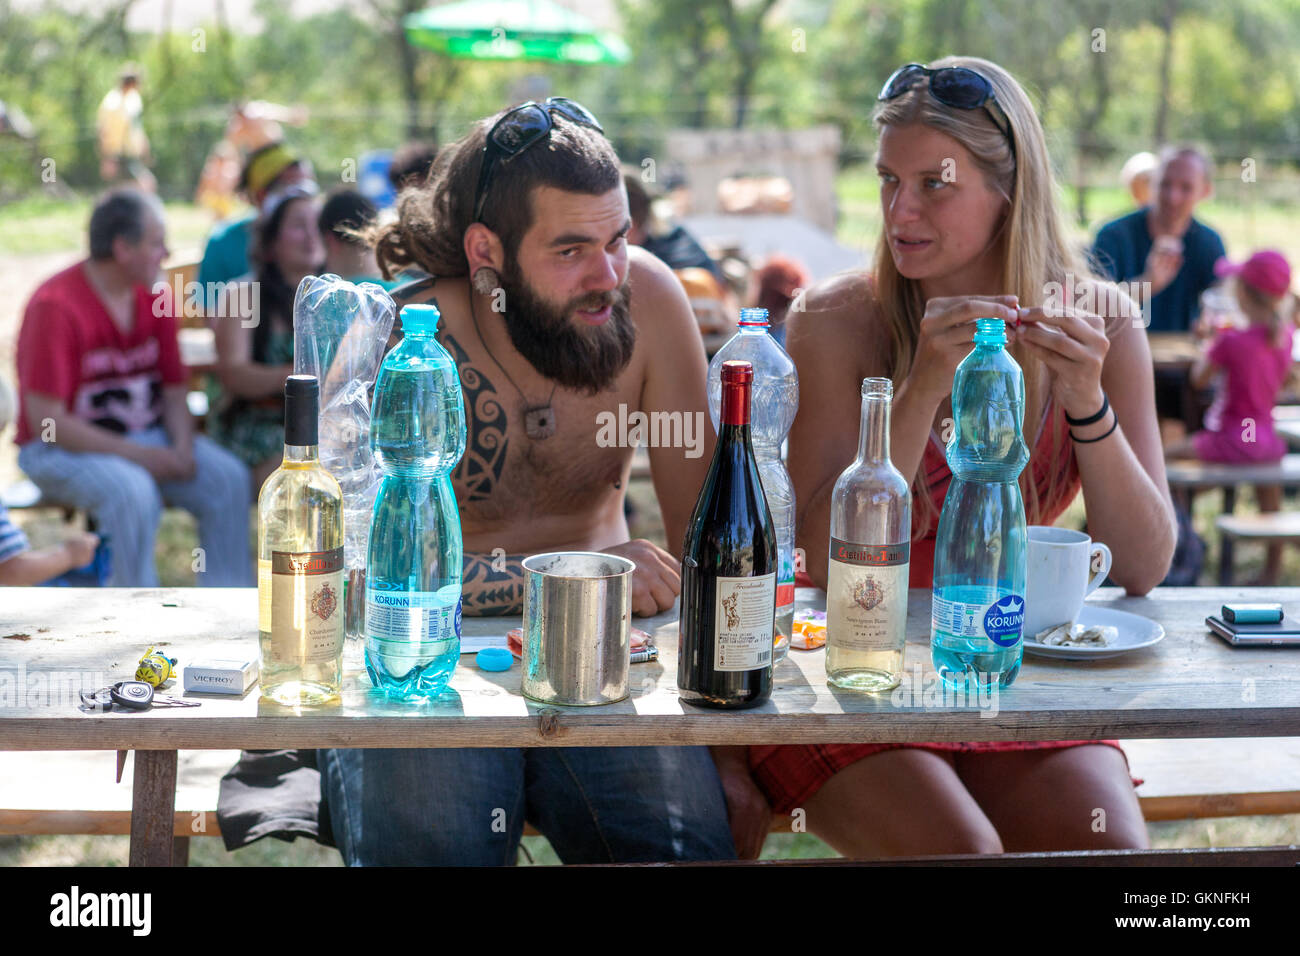 Couple Seating at Table Bottles of Different Drinks Hot Summer Garden Party Man Woman Summer Relax Outside People Relaxing Leisure Lifestyle Summerly Stock Photo